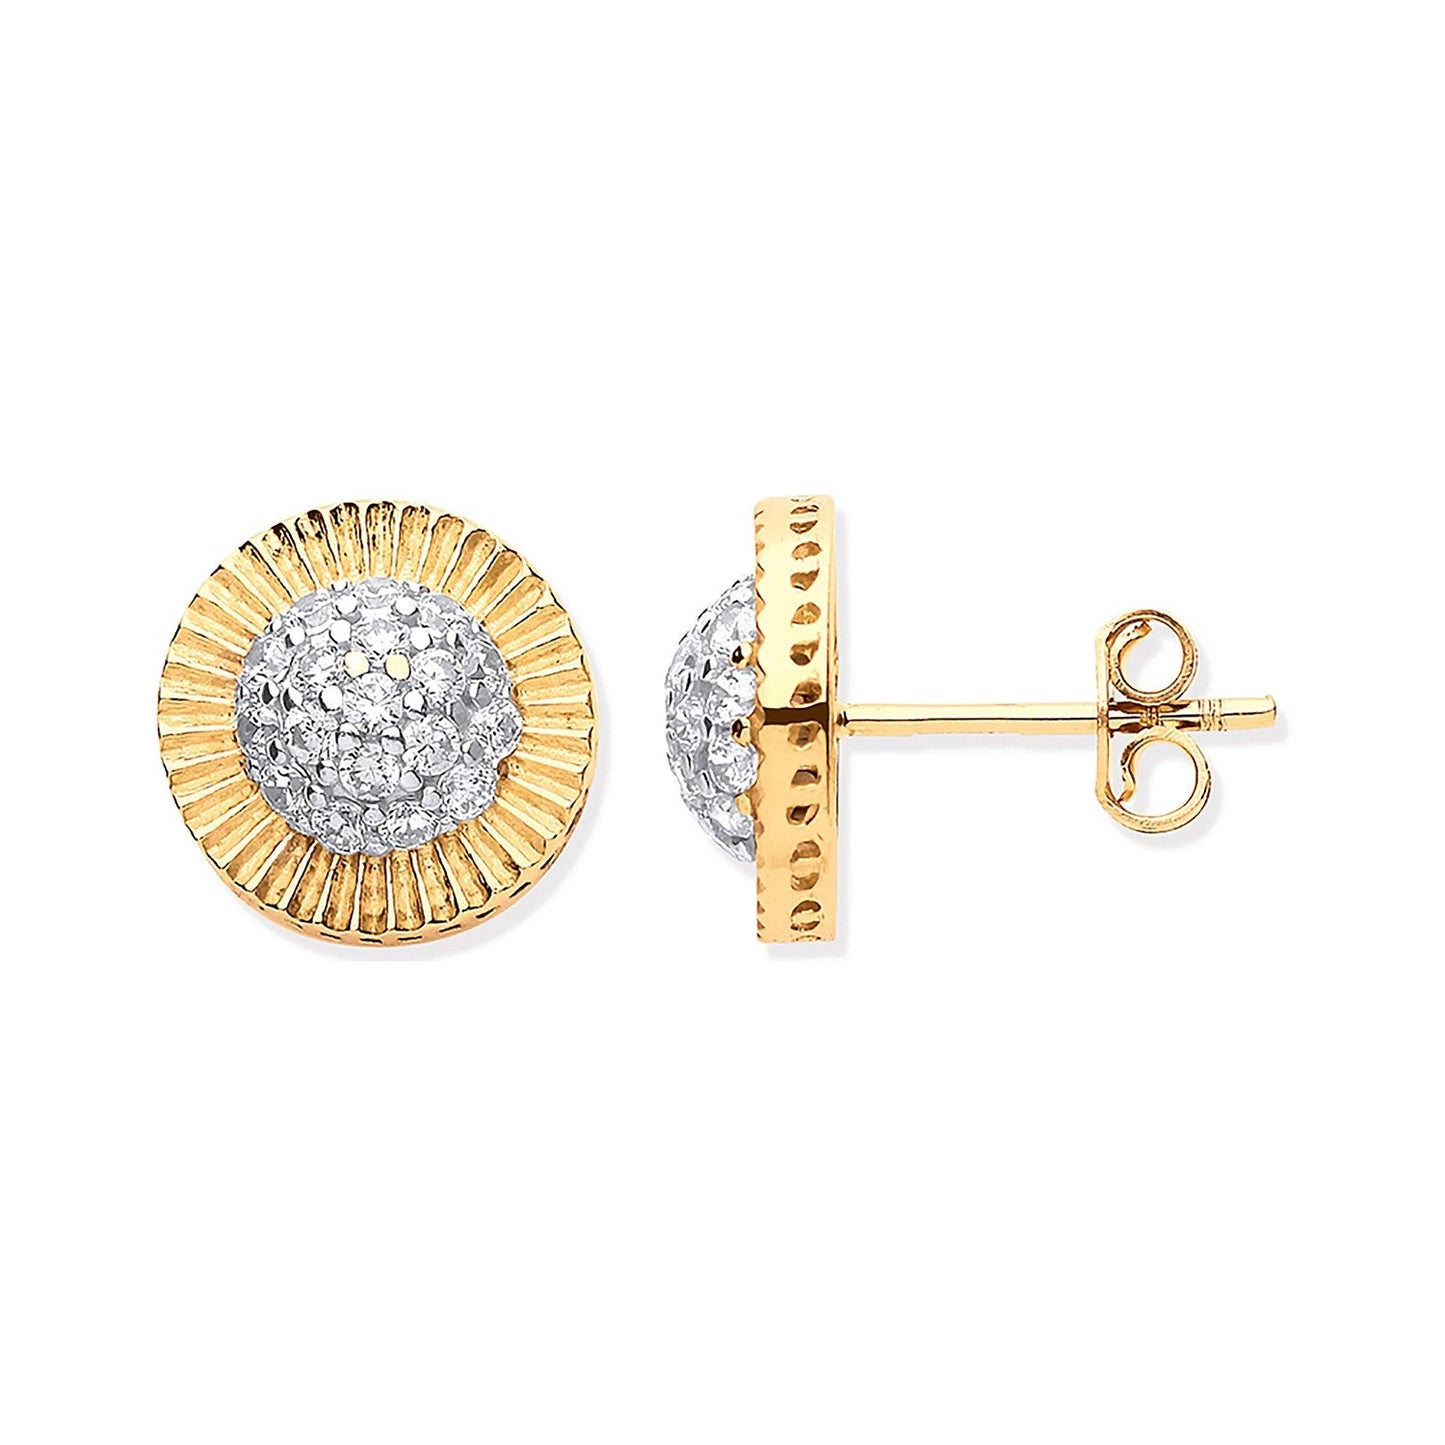 9ct Yellow Gold Cz Round Stud Earrings 11.5mm - FJewellery